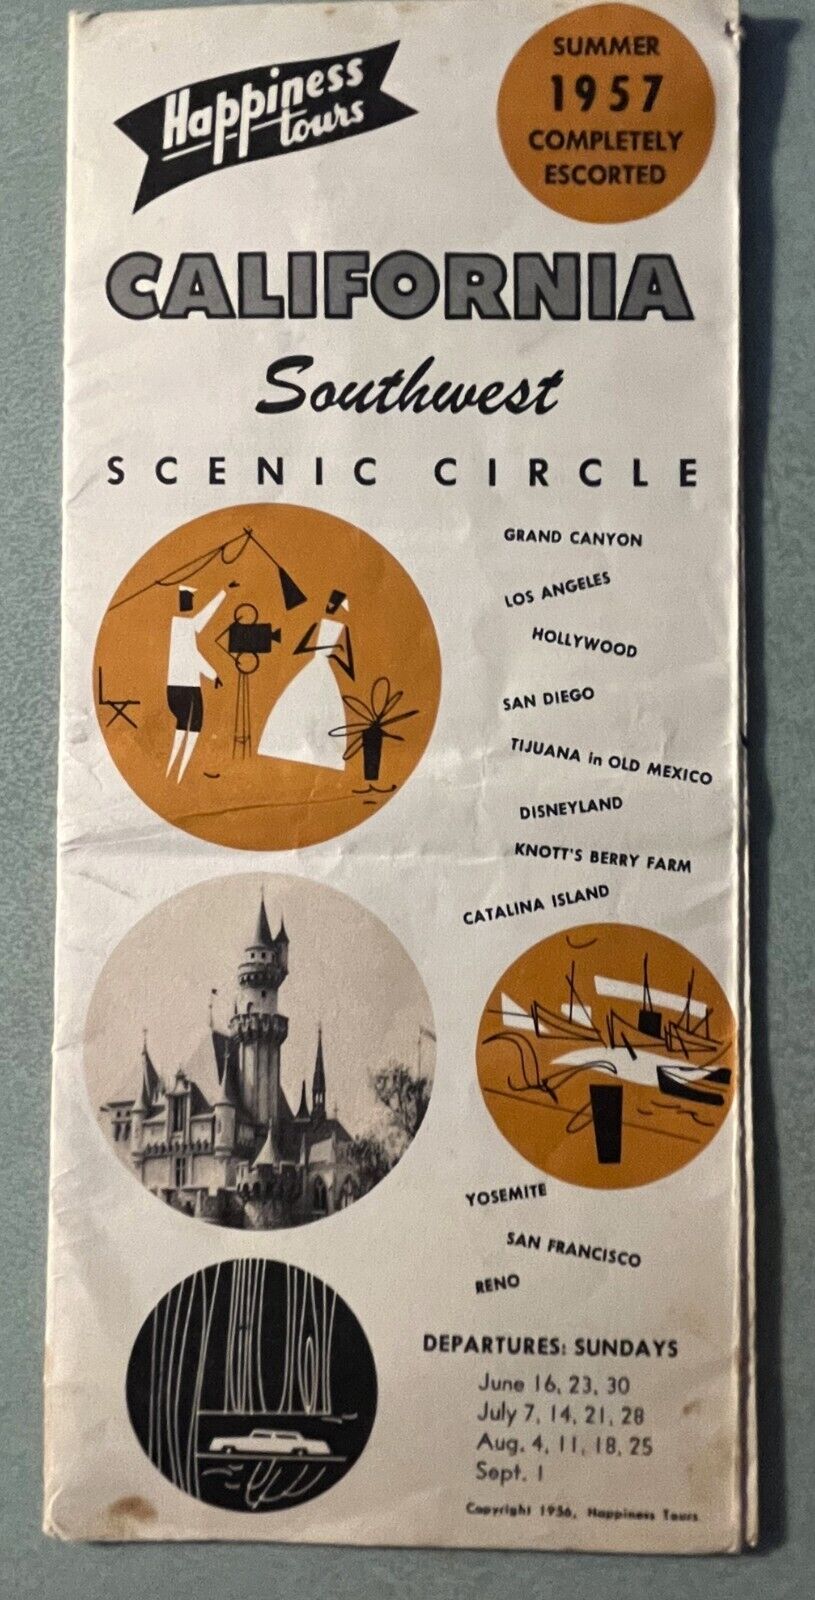 Vintage Summer 1957 California Southwest Scenic Circle Tour Map Happiness Tours